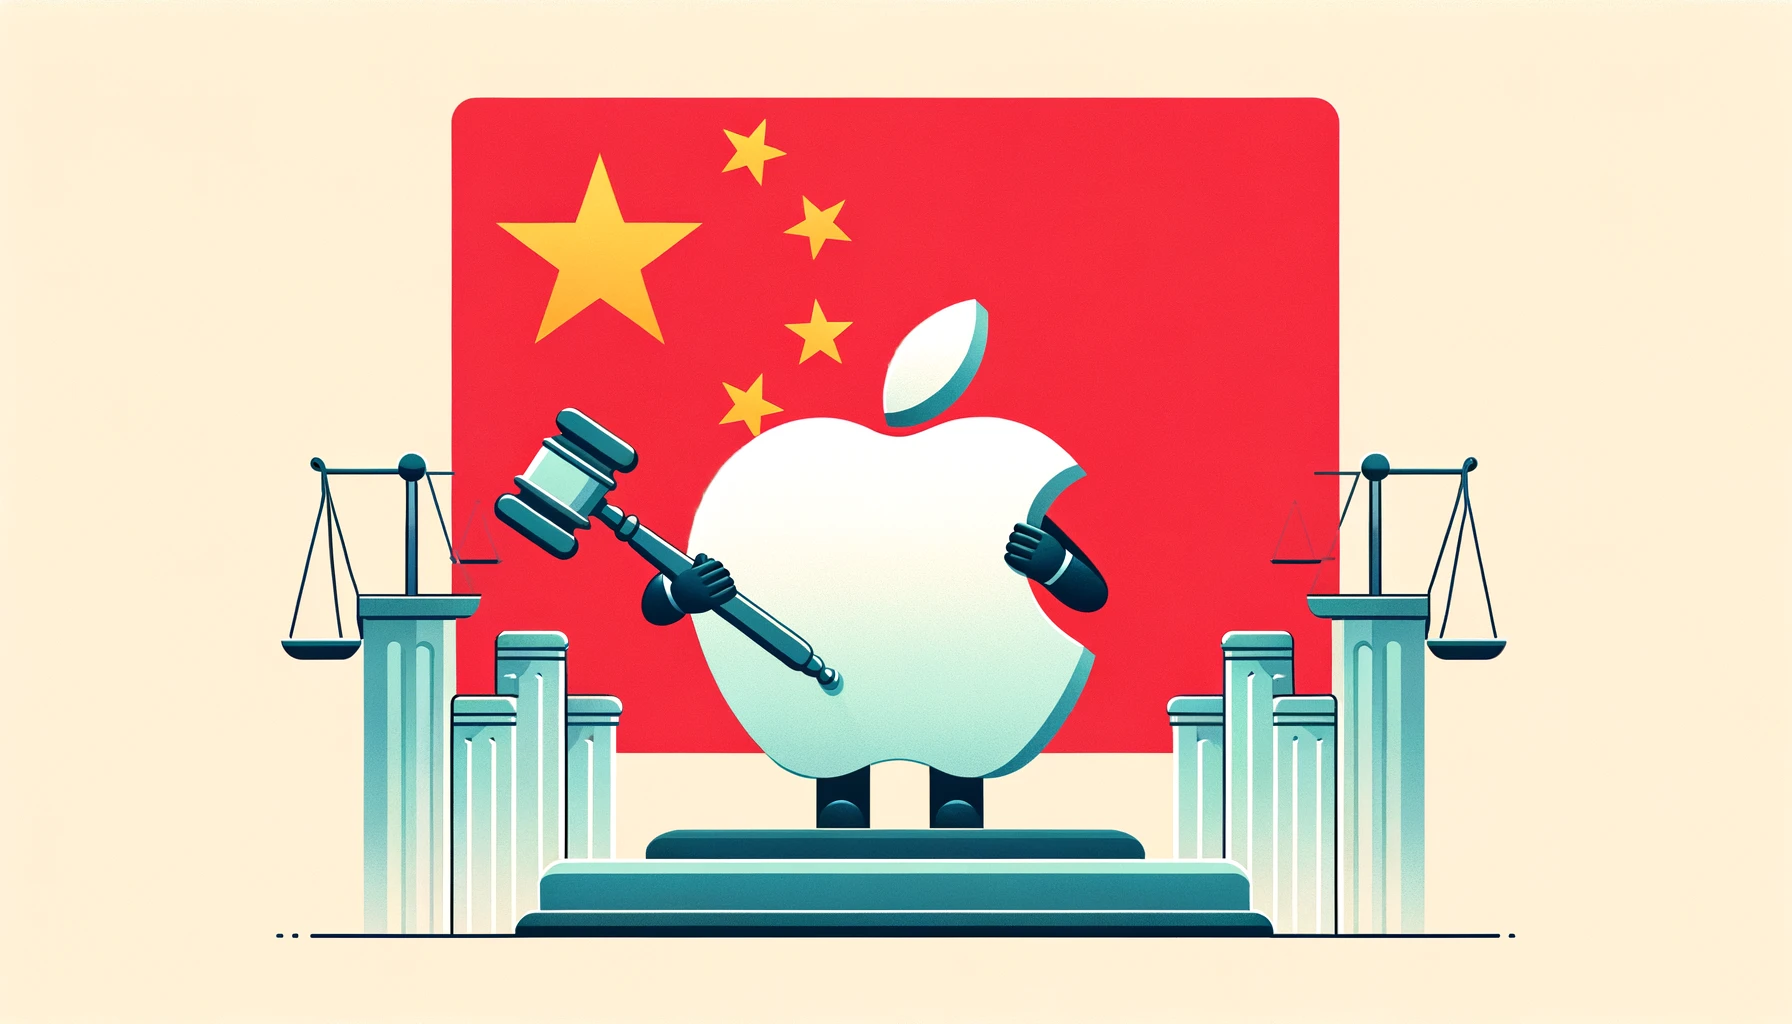 Apple triumphs in China’s legal battle over App Store fees.